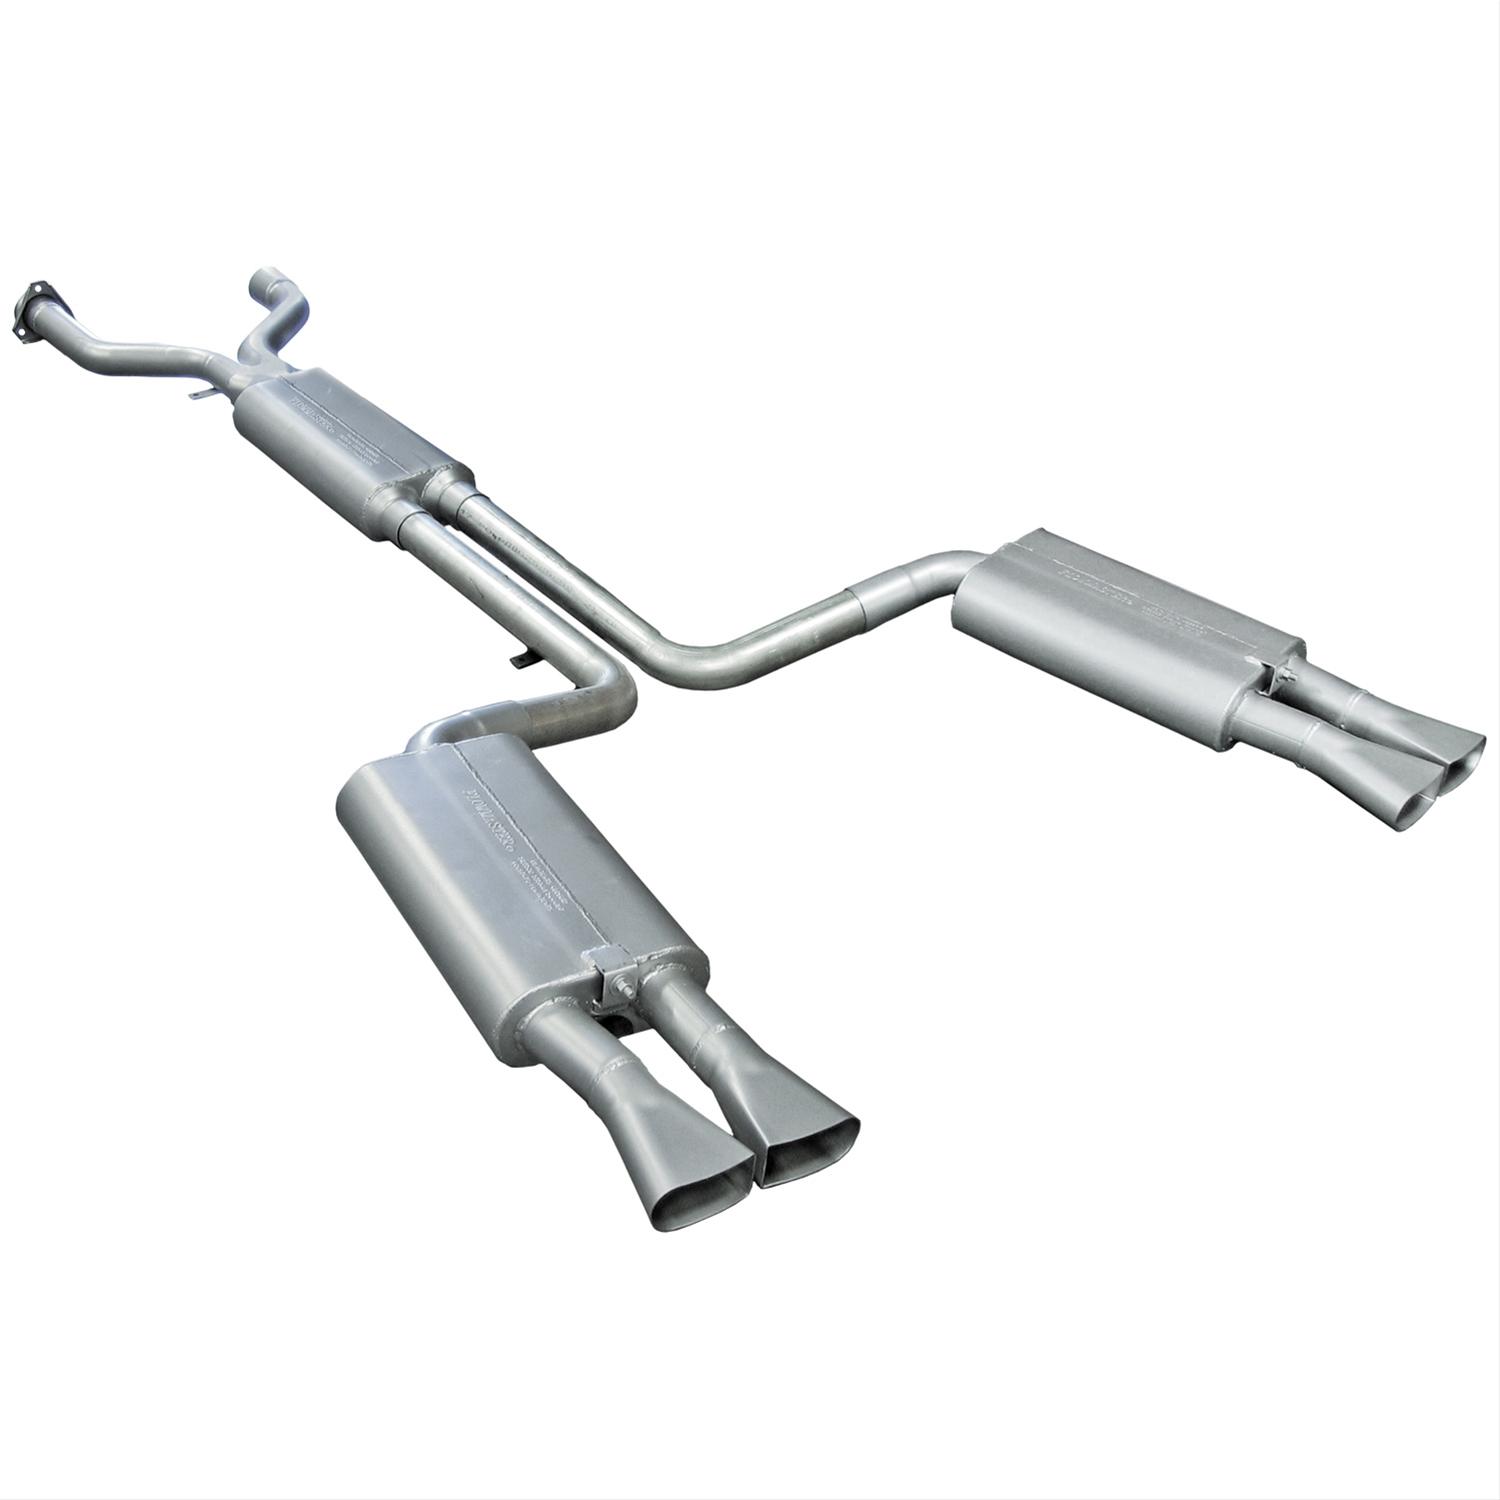 Flowmaster 17115 Flowmaster Force II Exhaust Systems | Summit Racing